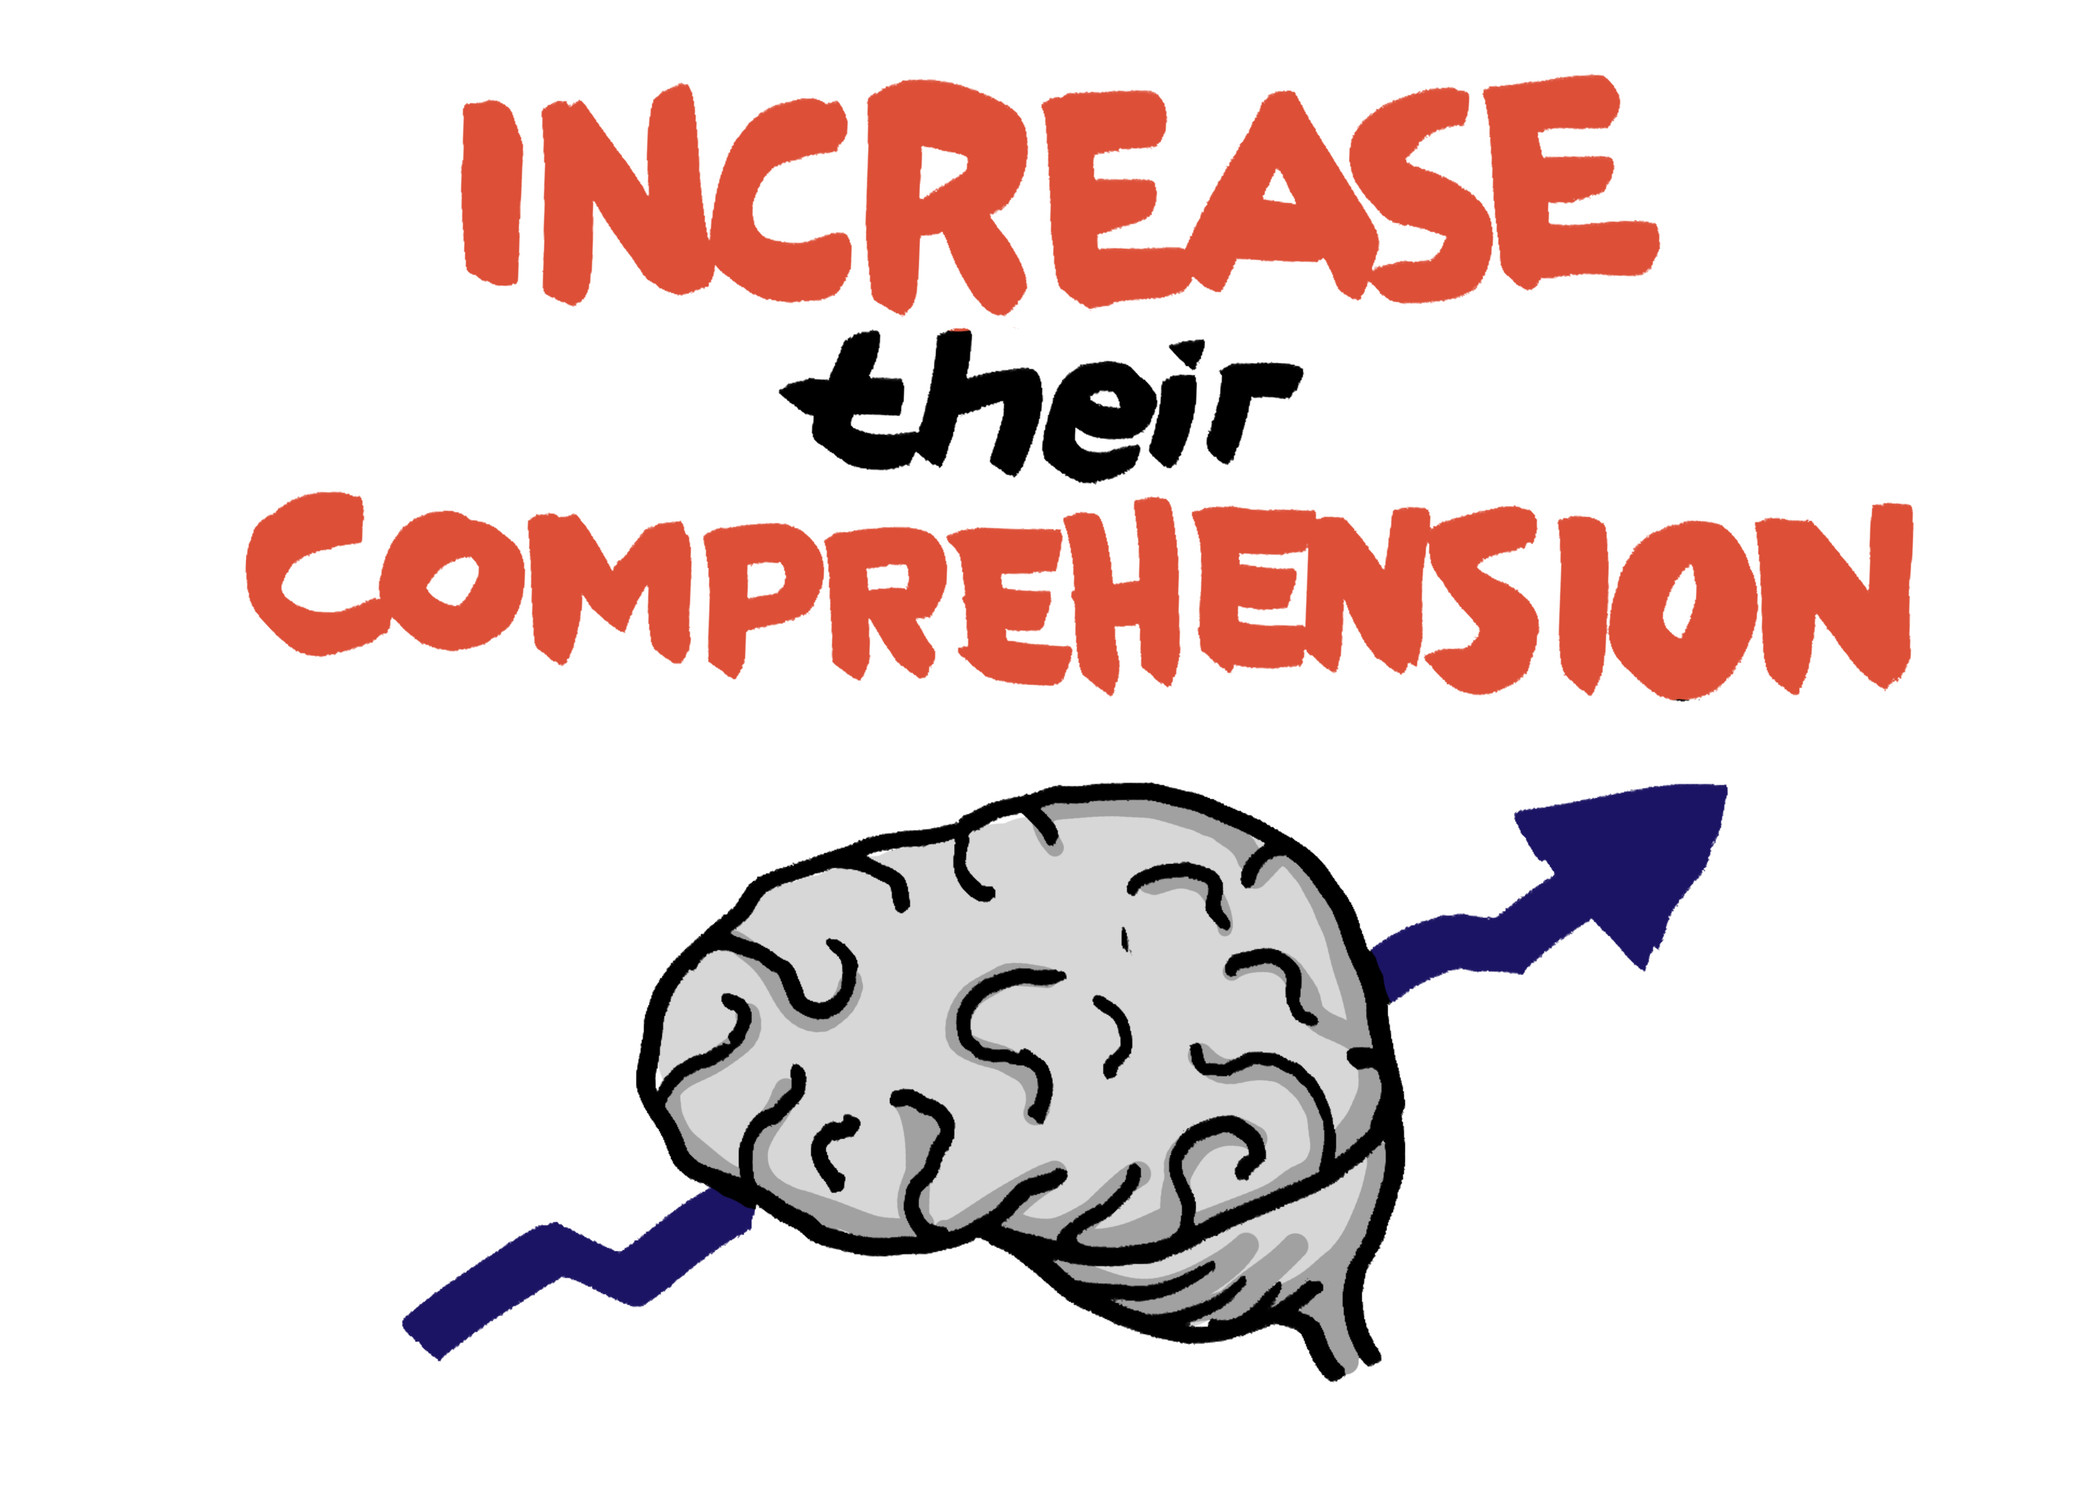 Sketch of a brain with text that reads "increase their comprehension"